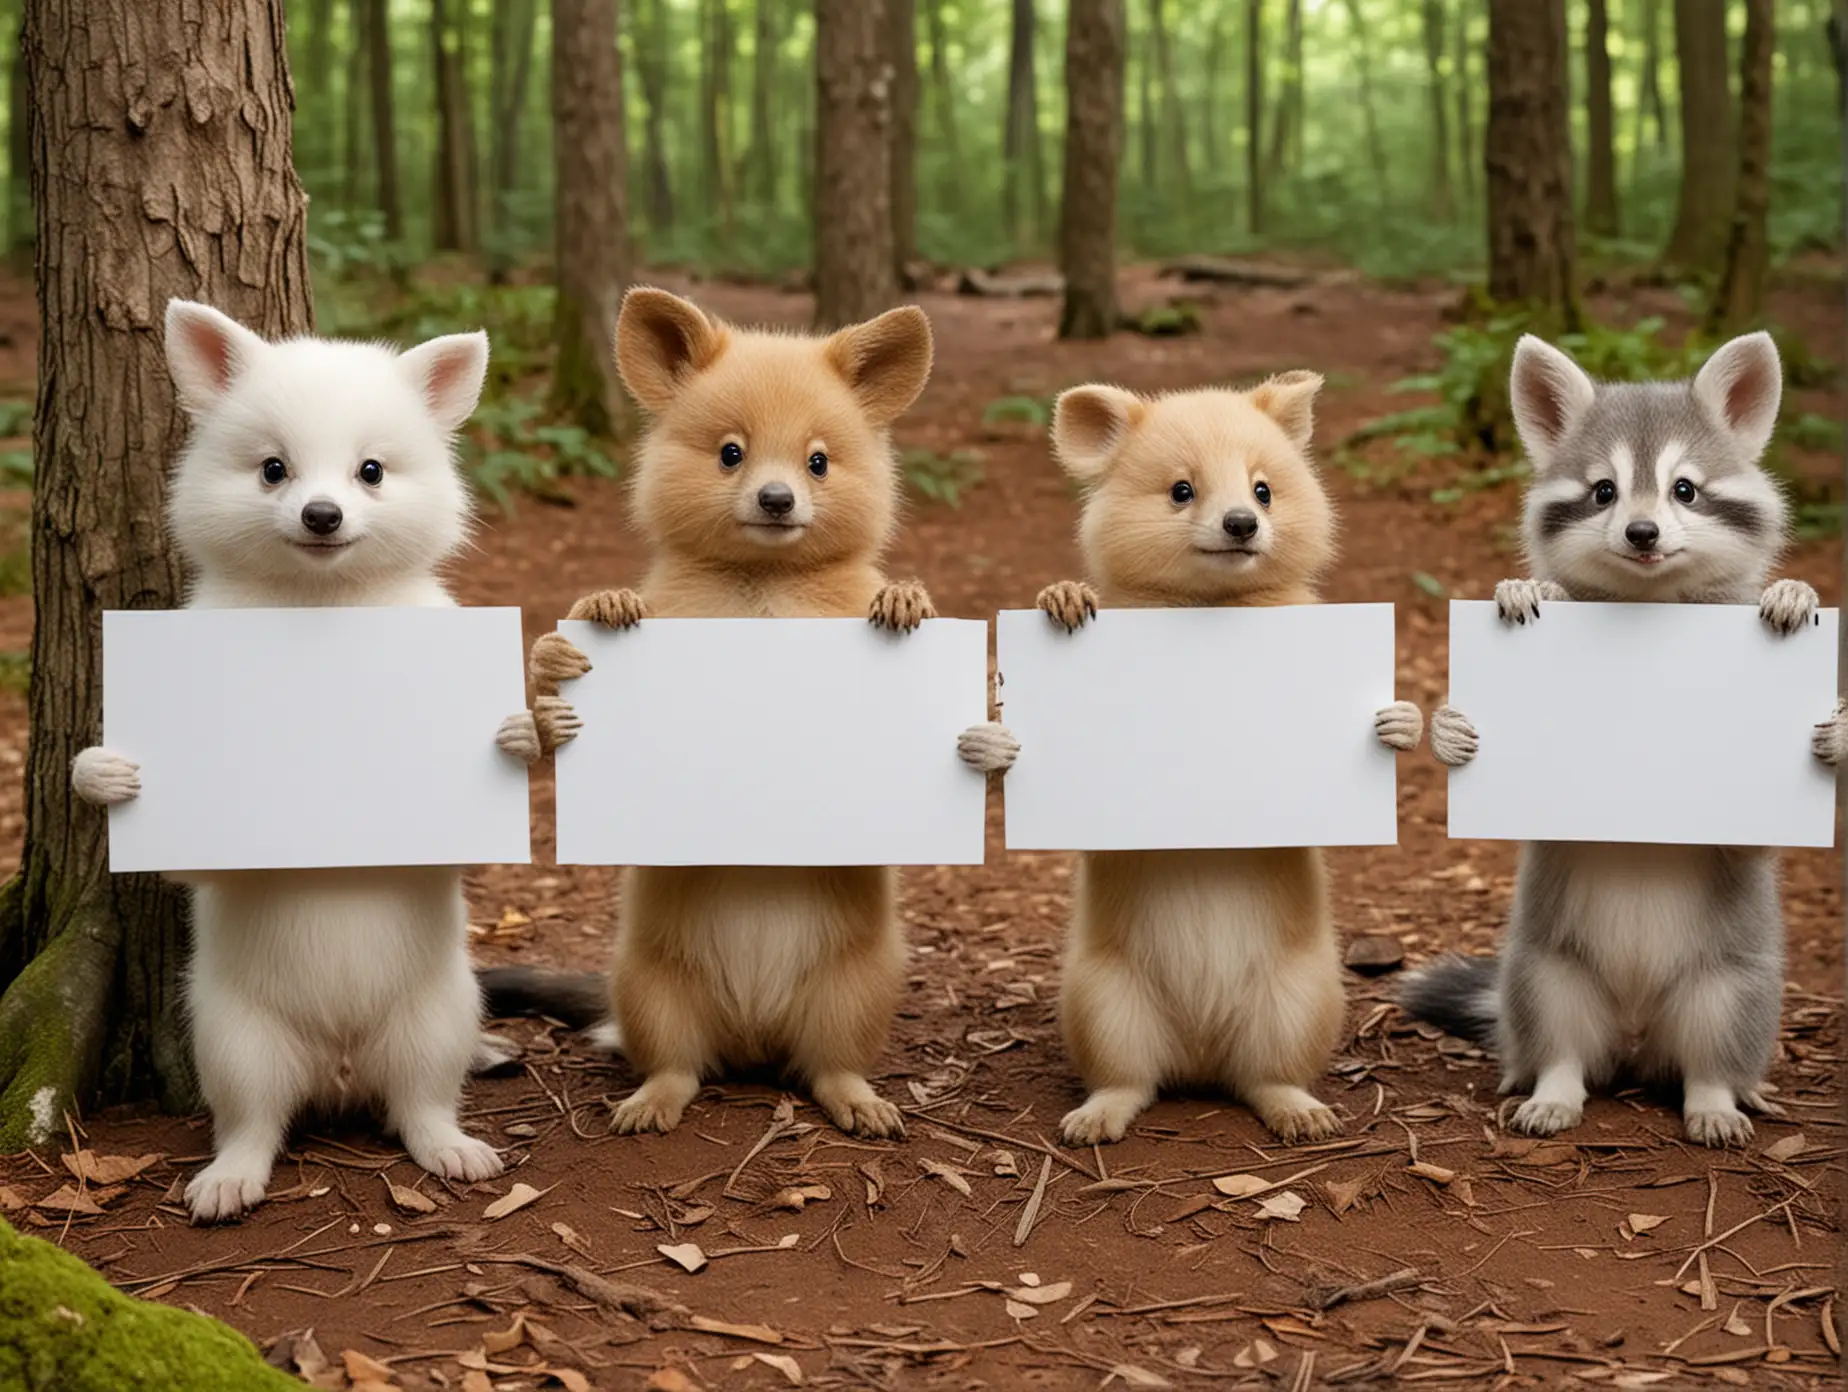 Adorable Baby Animals with Blank Signs in Enchanted Forest Campsite